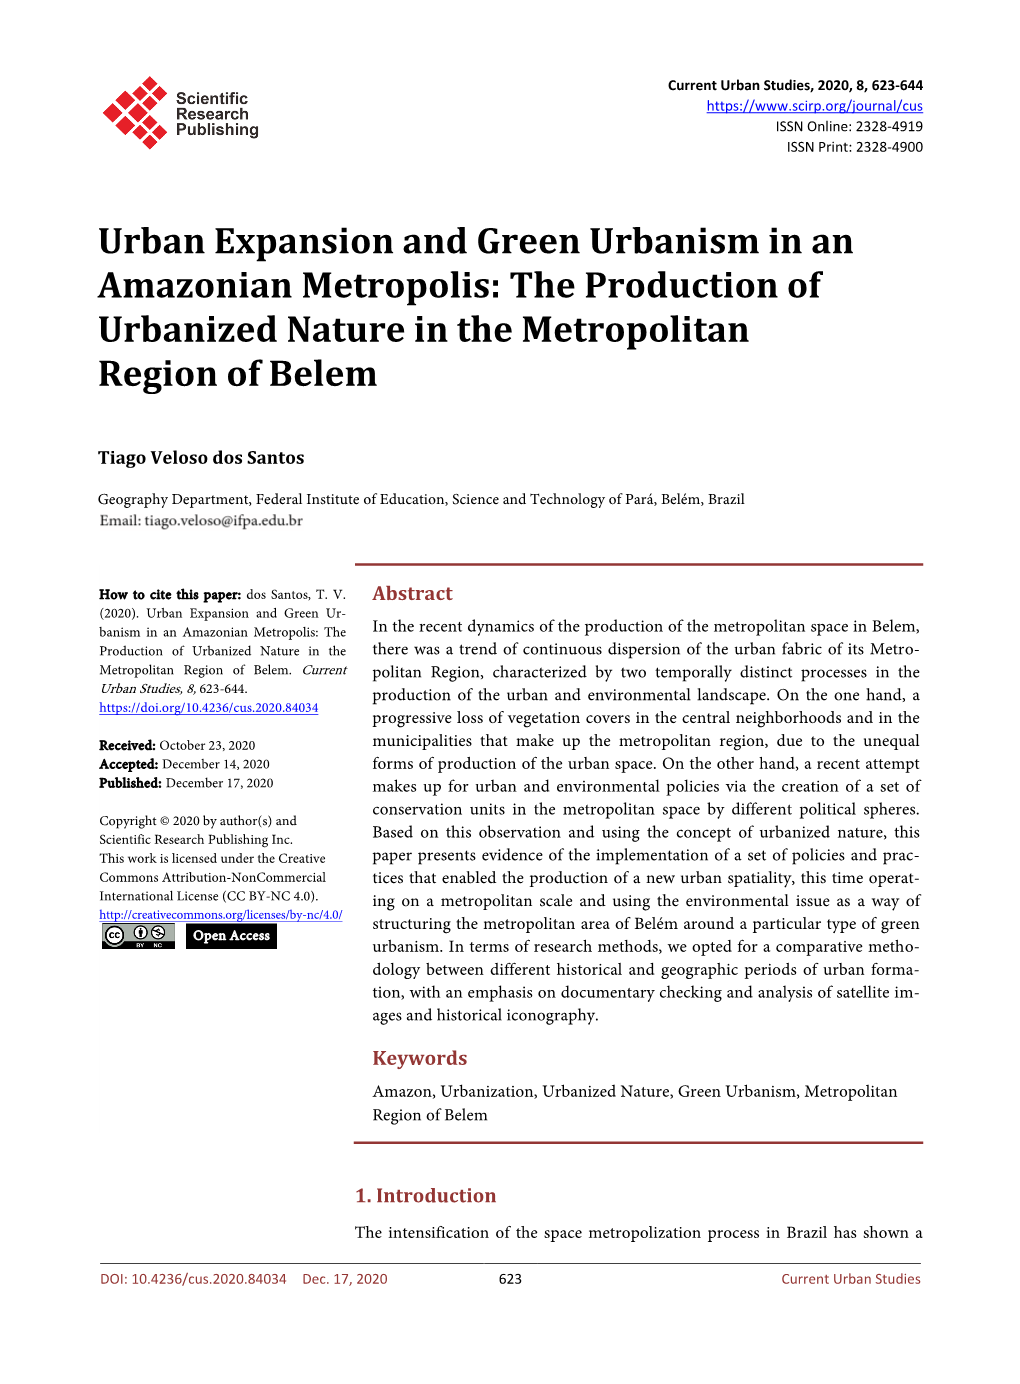 Urban Expansion and Green Urbanism in an Amazonian Metropolis: the Production of Urbanized Nature in the Metropolitan Region of Belem